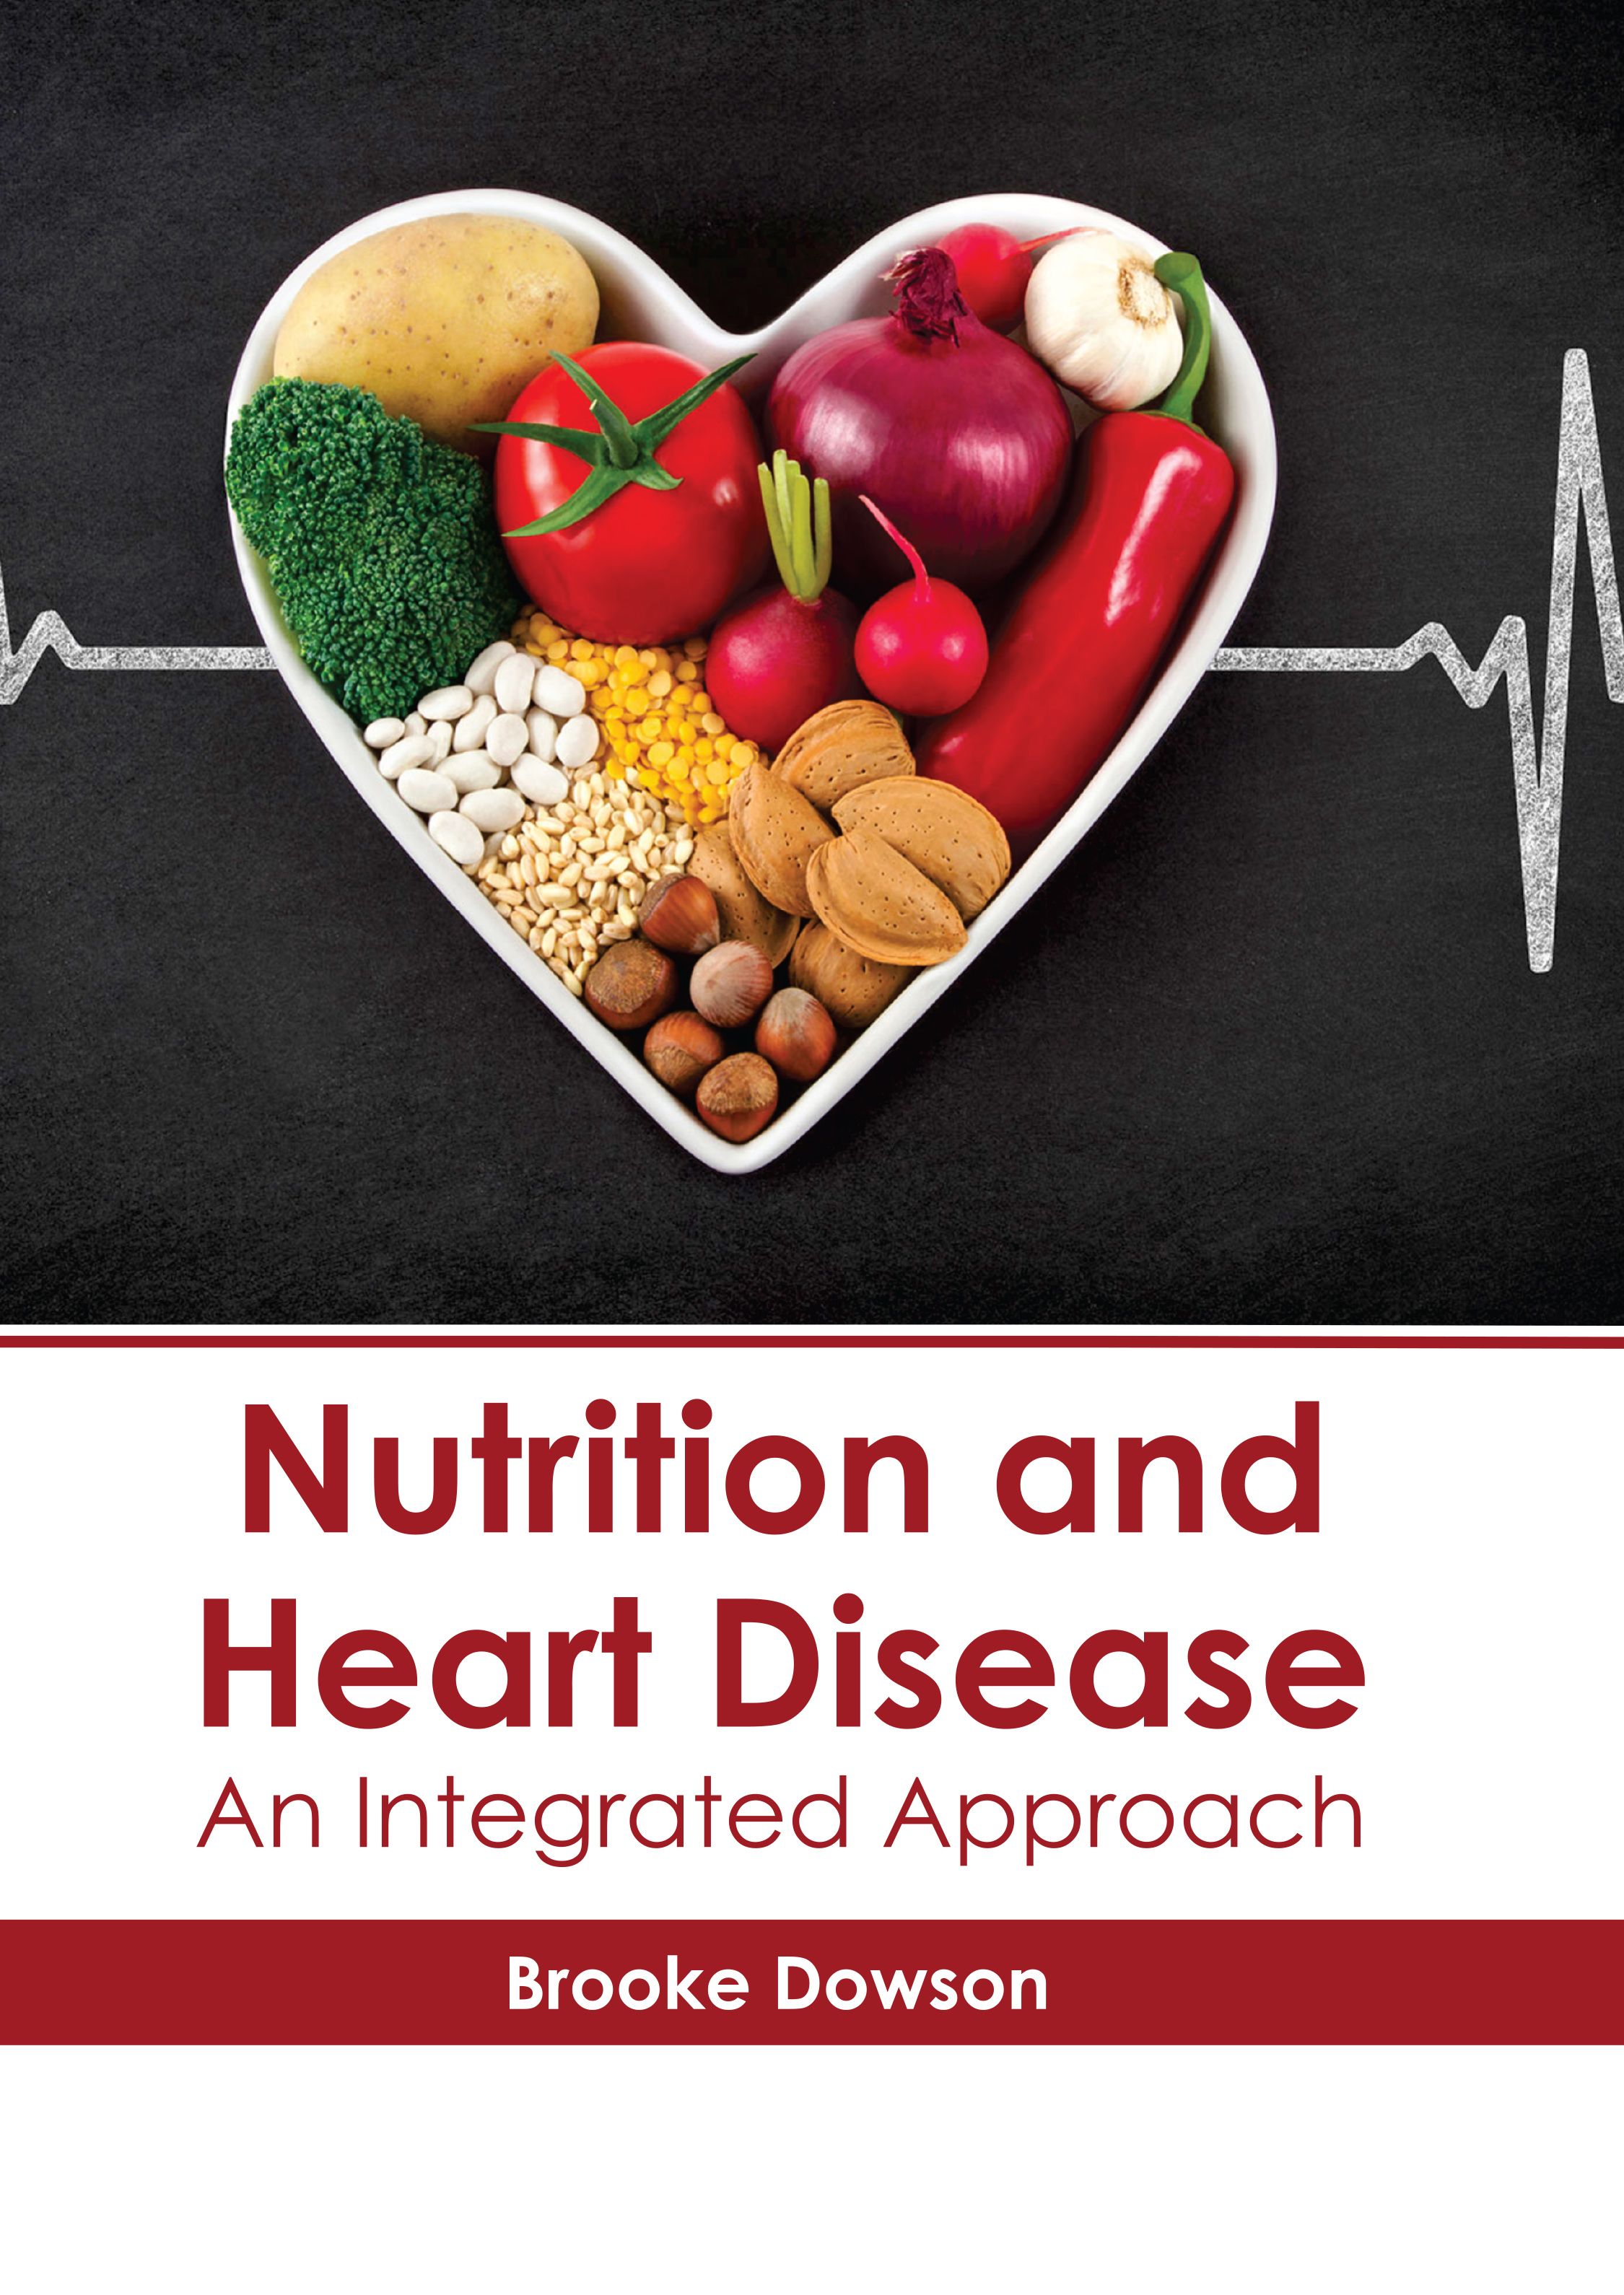 exclusive-publishers/american-medical-publishers/nutrition-and-heart-disease-an-integrated-approach-9781639277599